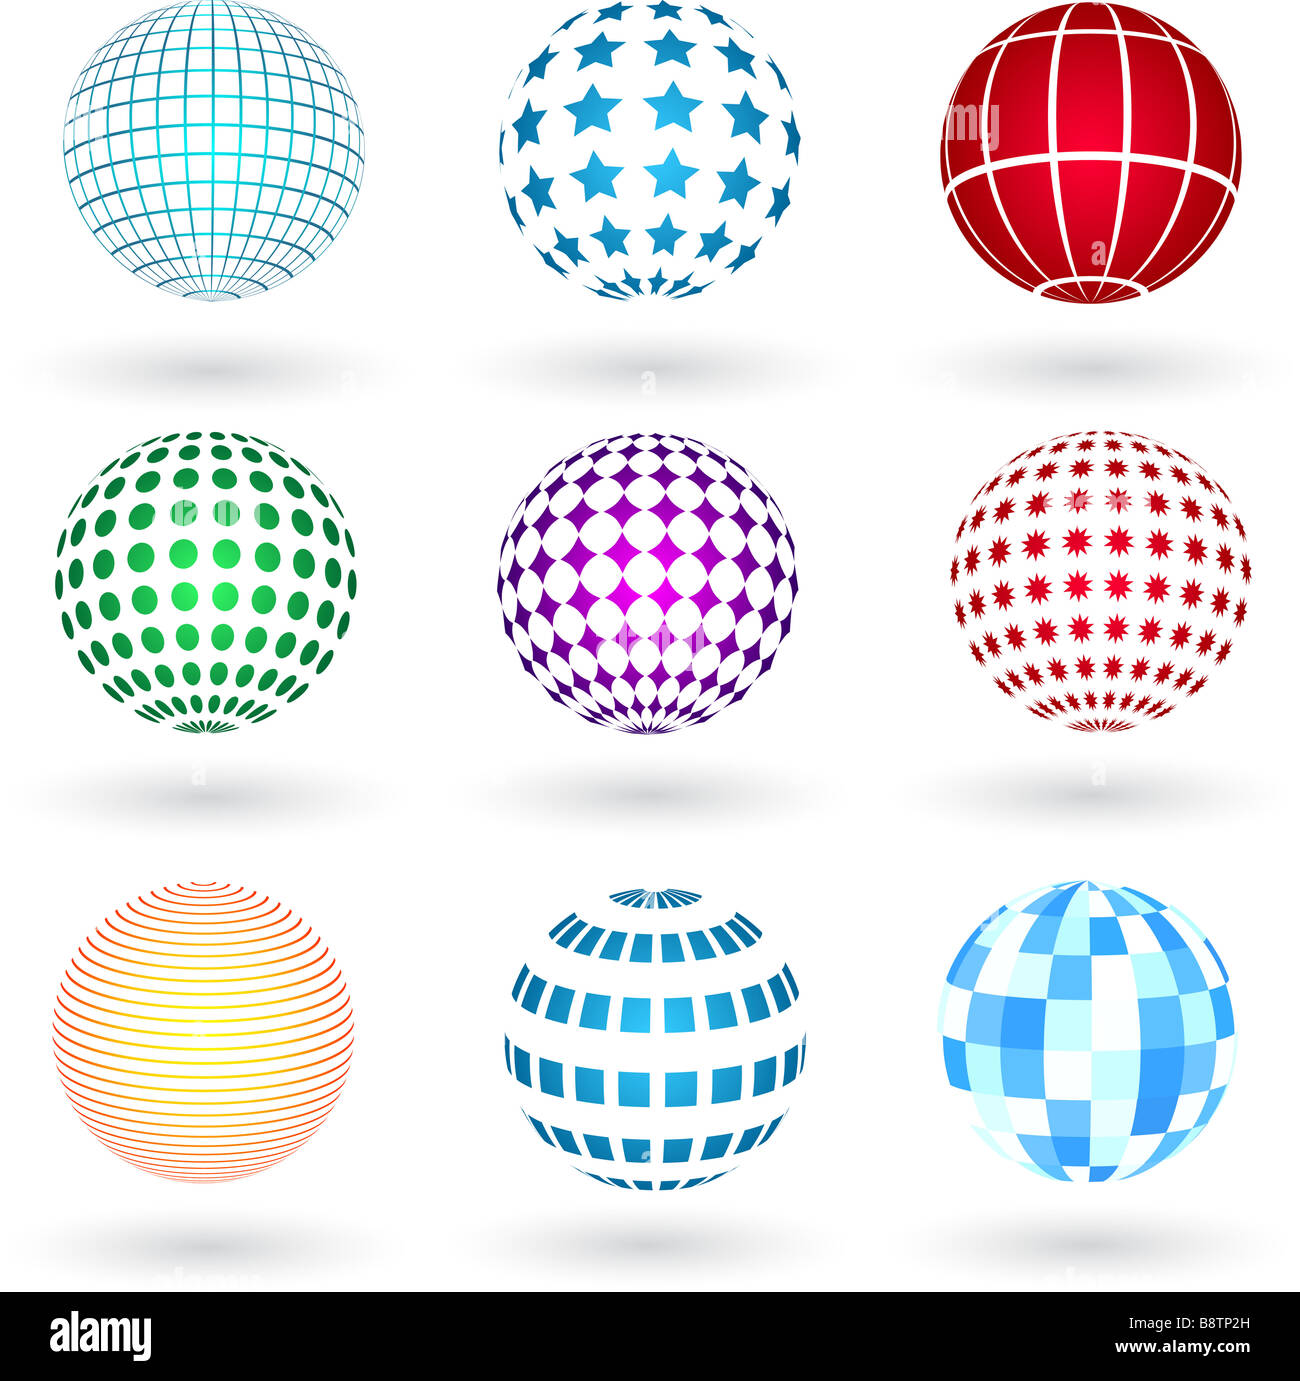 Spheres with various designs Stock Photo